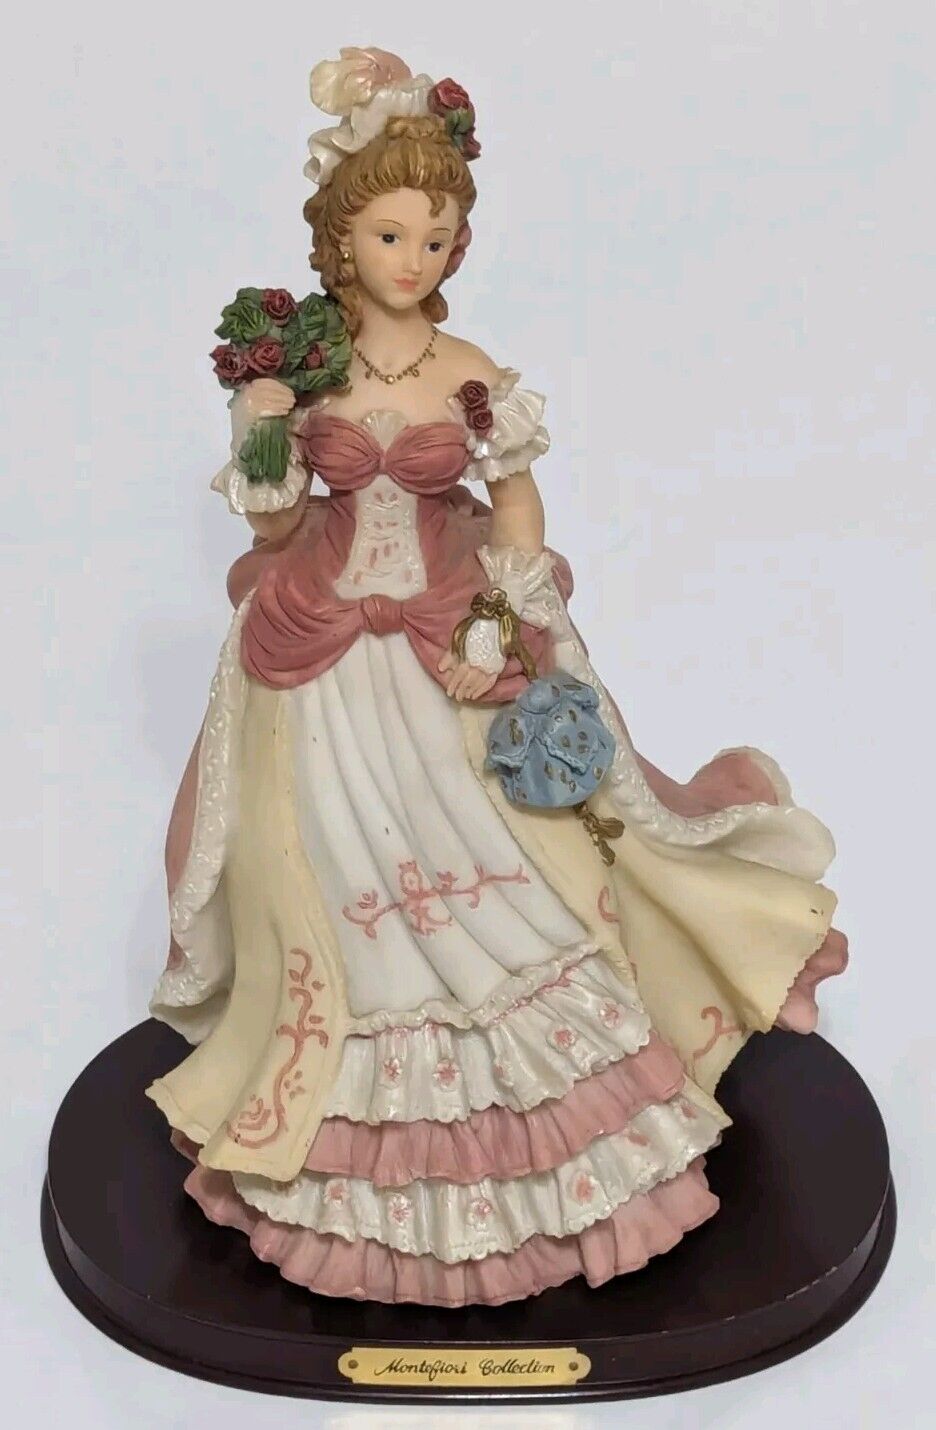 Woman with Rose Bouquet, Montefiori Collection, 13